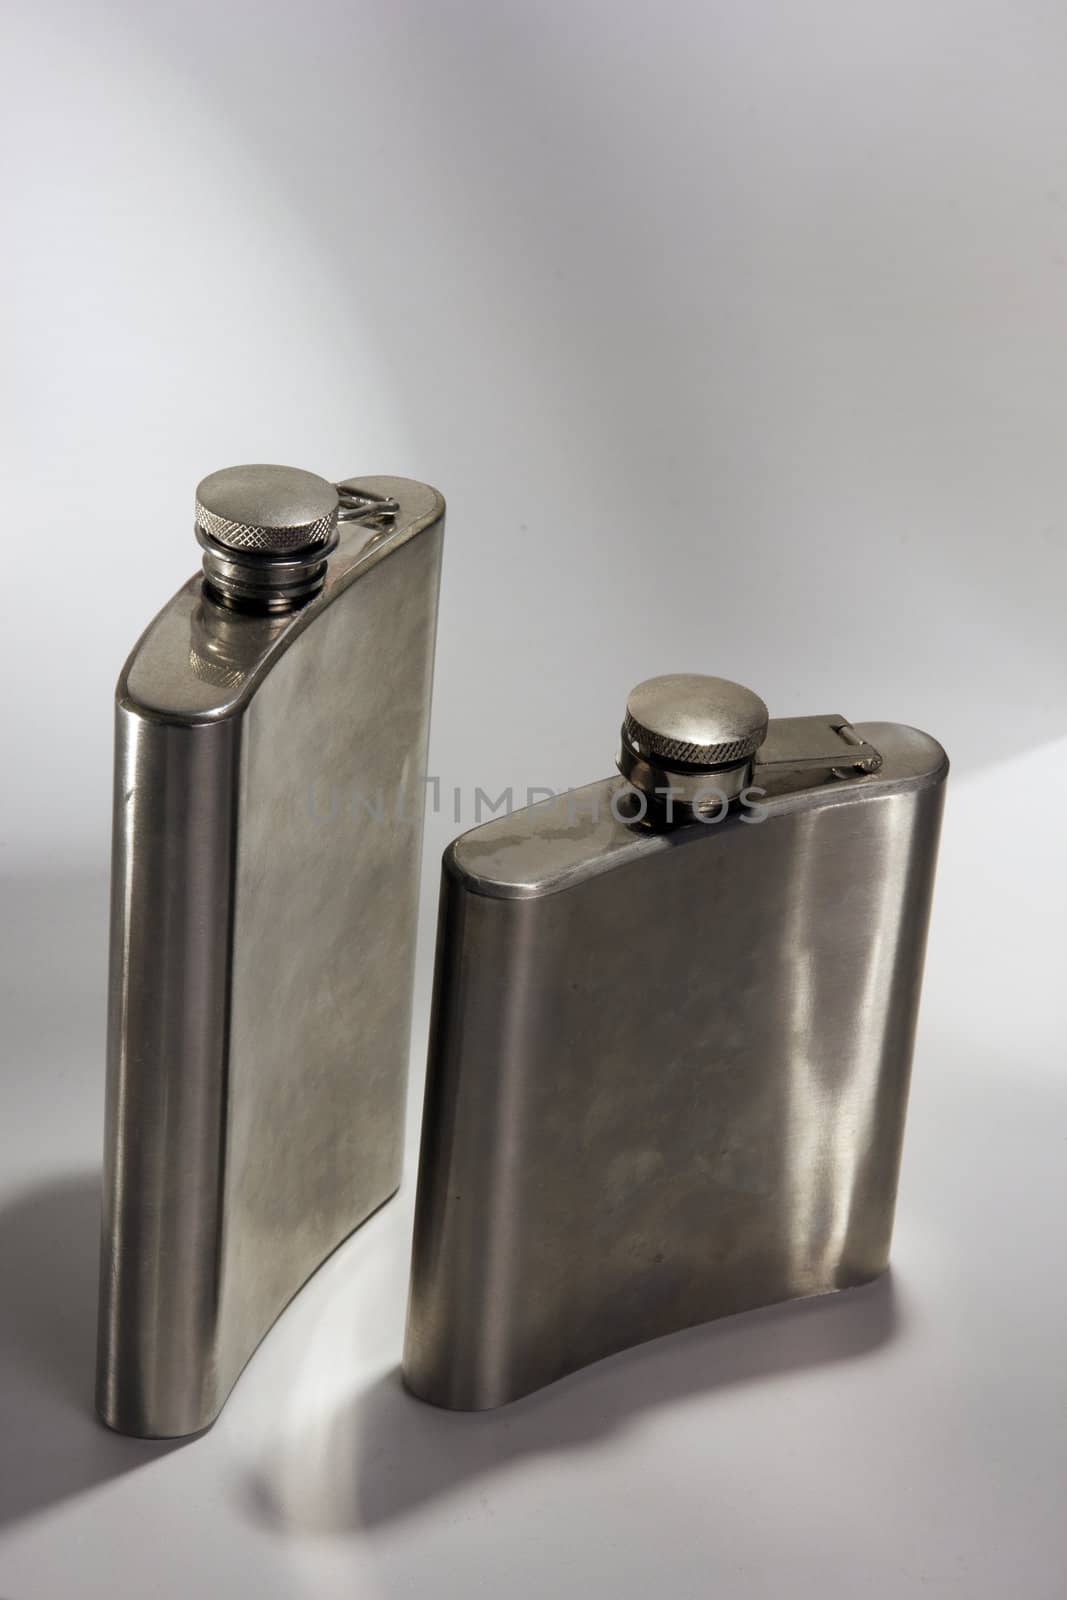 One of the most favorite men's toy - a metal flask for alcoholic beverages. Two used jars of stainless steel for whiskey or brandy